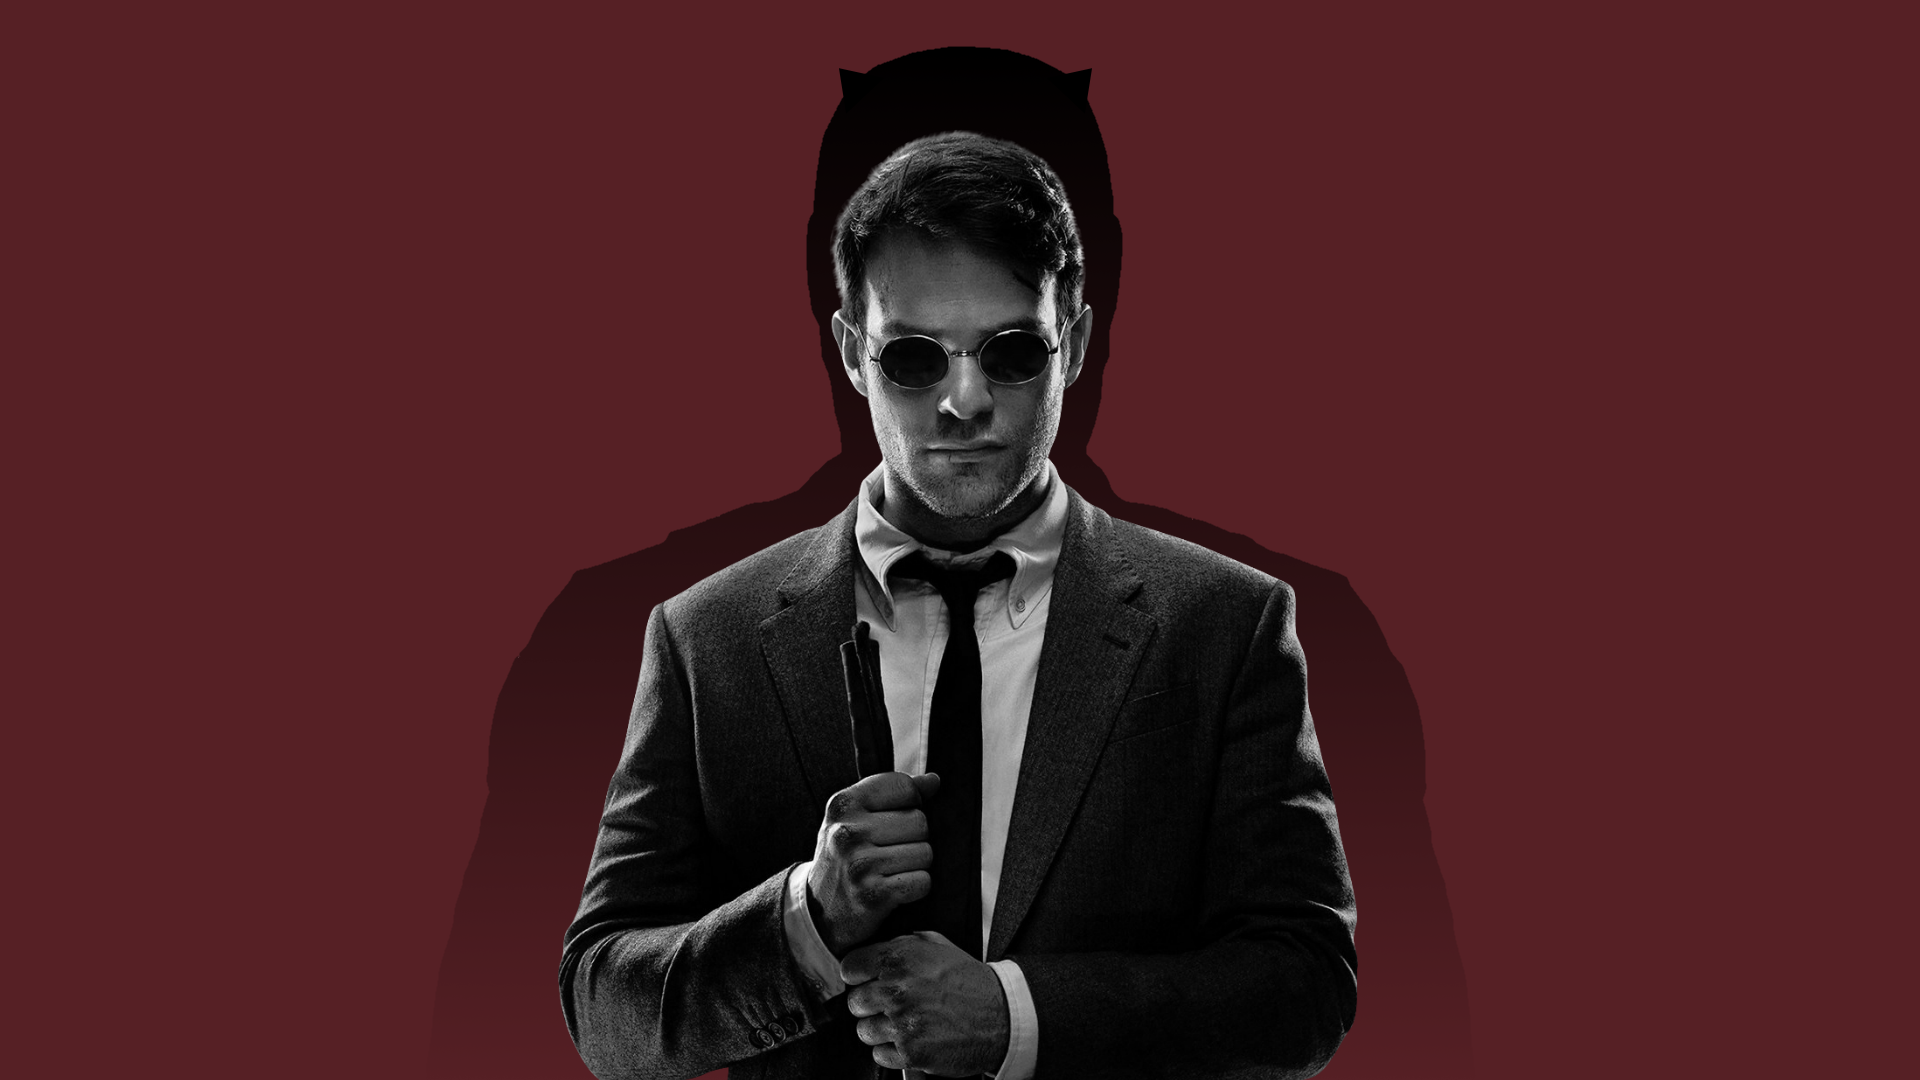 Just created this simple Daredevil wallpaper, share your thoughts!